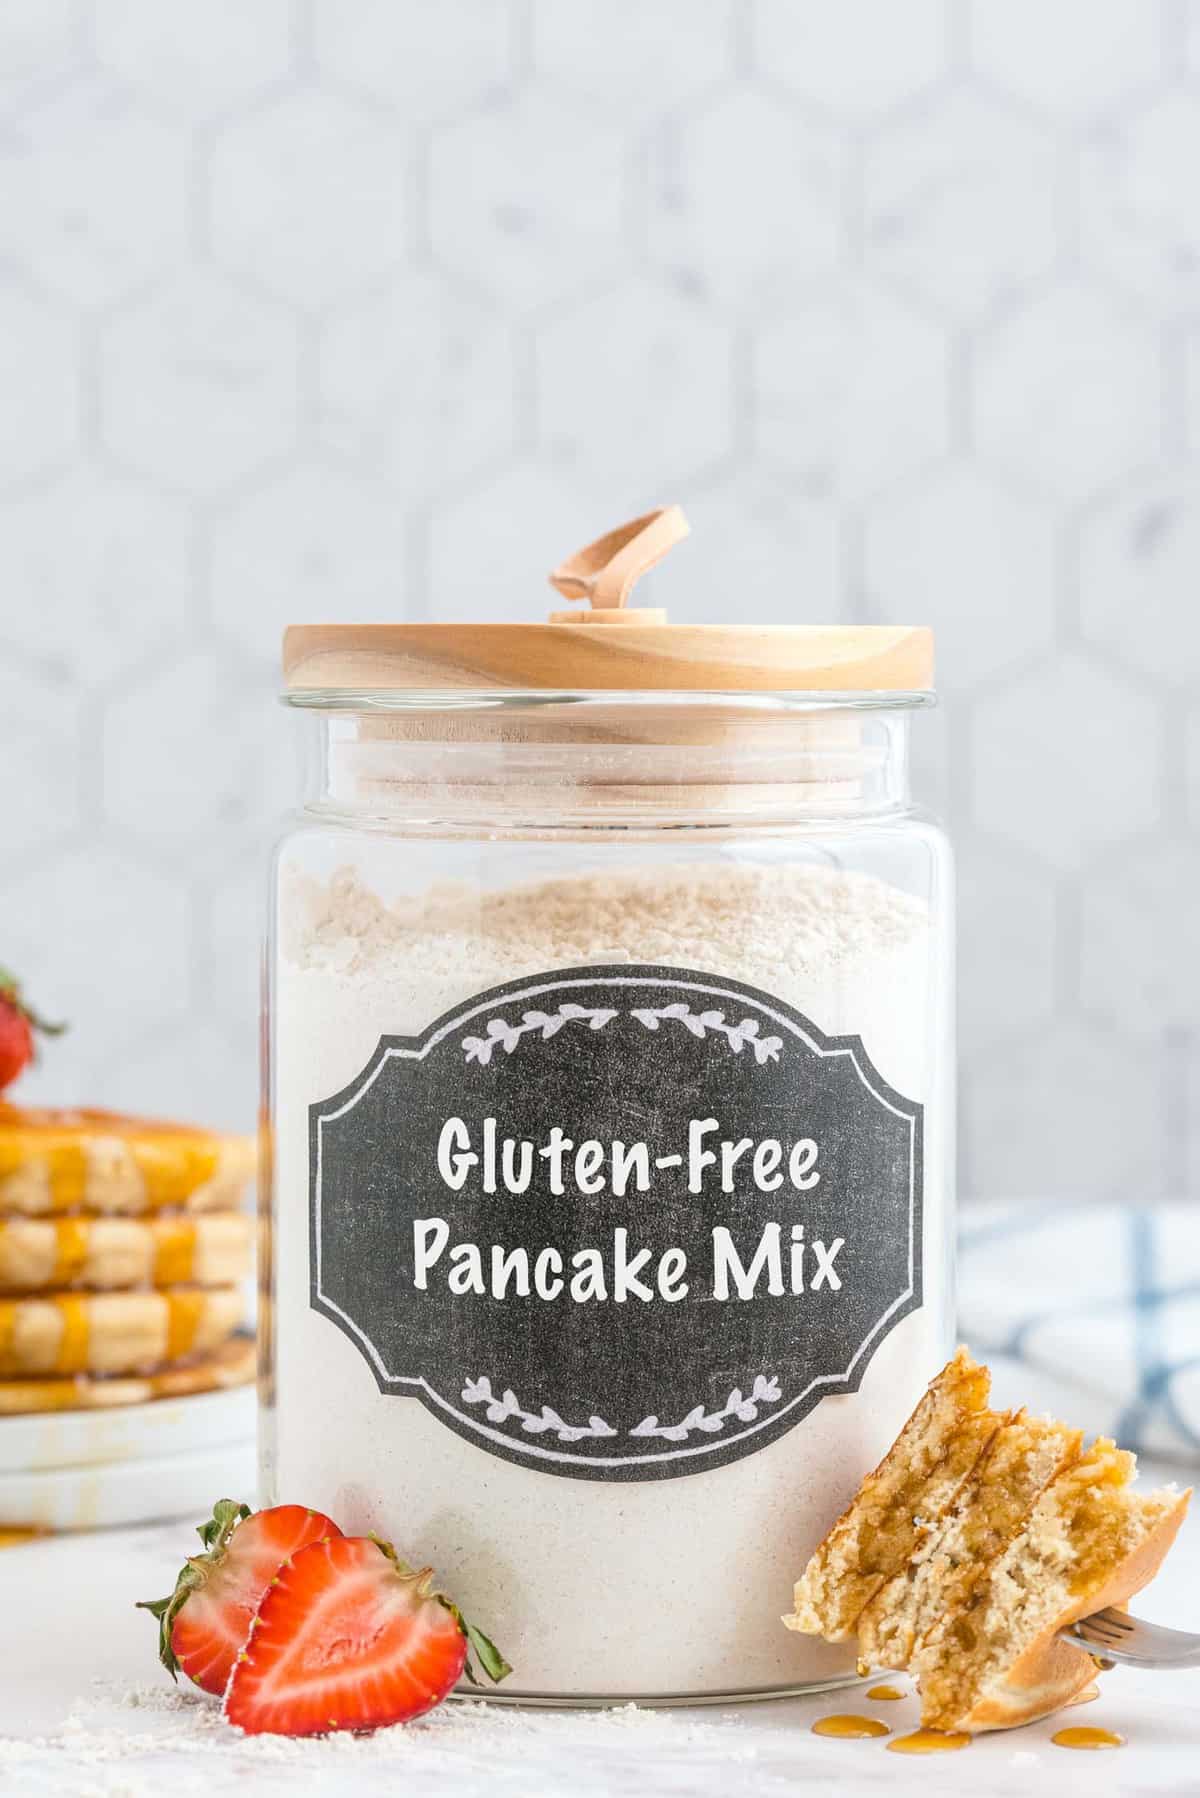 Glass jar with black label that reads "gluten-free pancake mix." Cut pancakes in foreground.